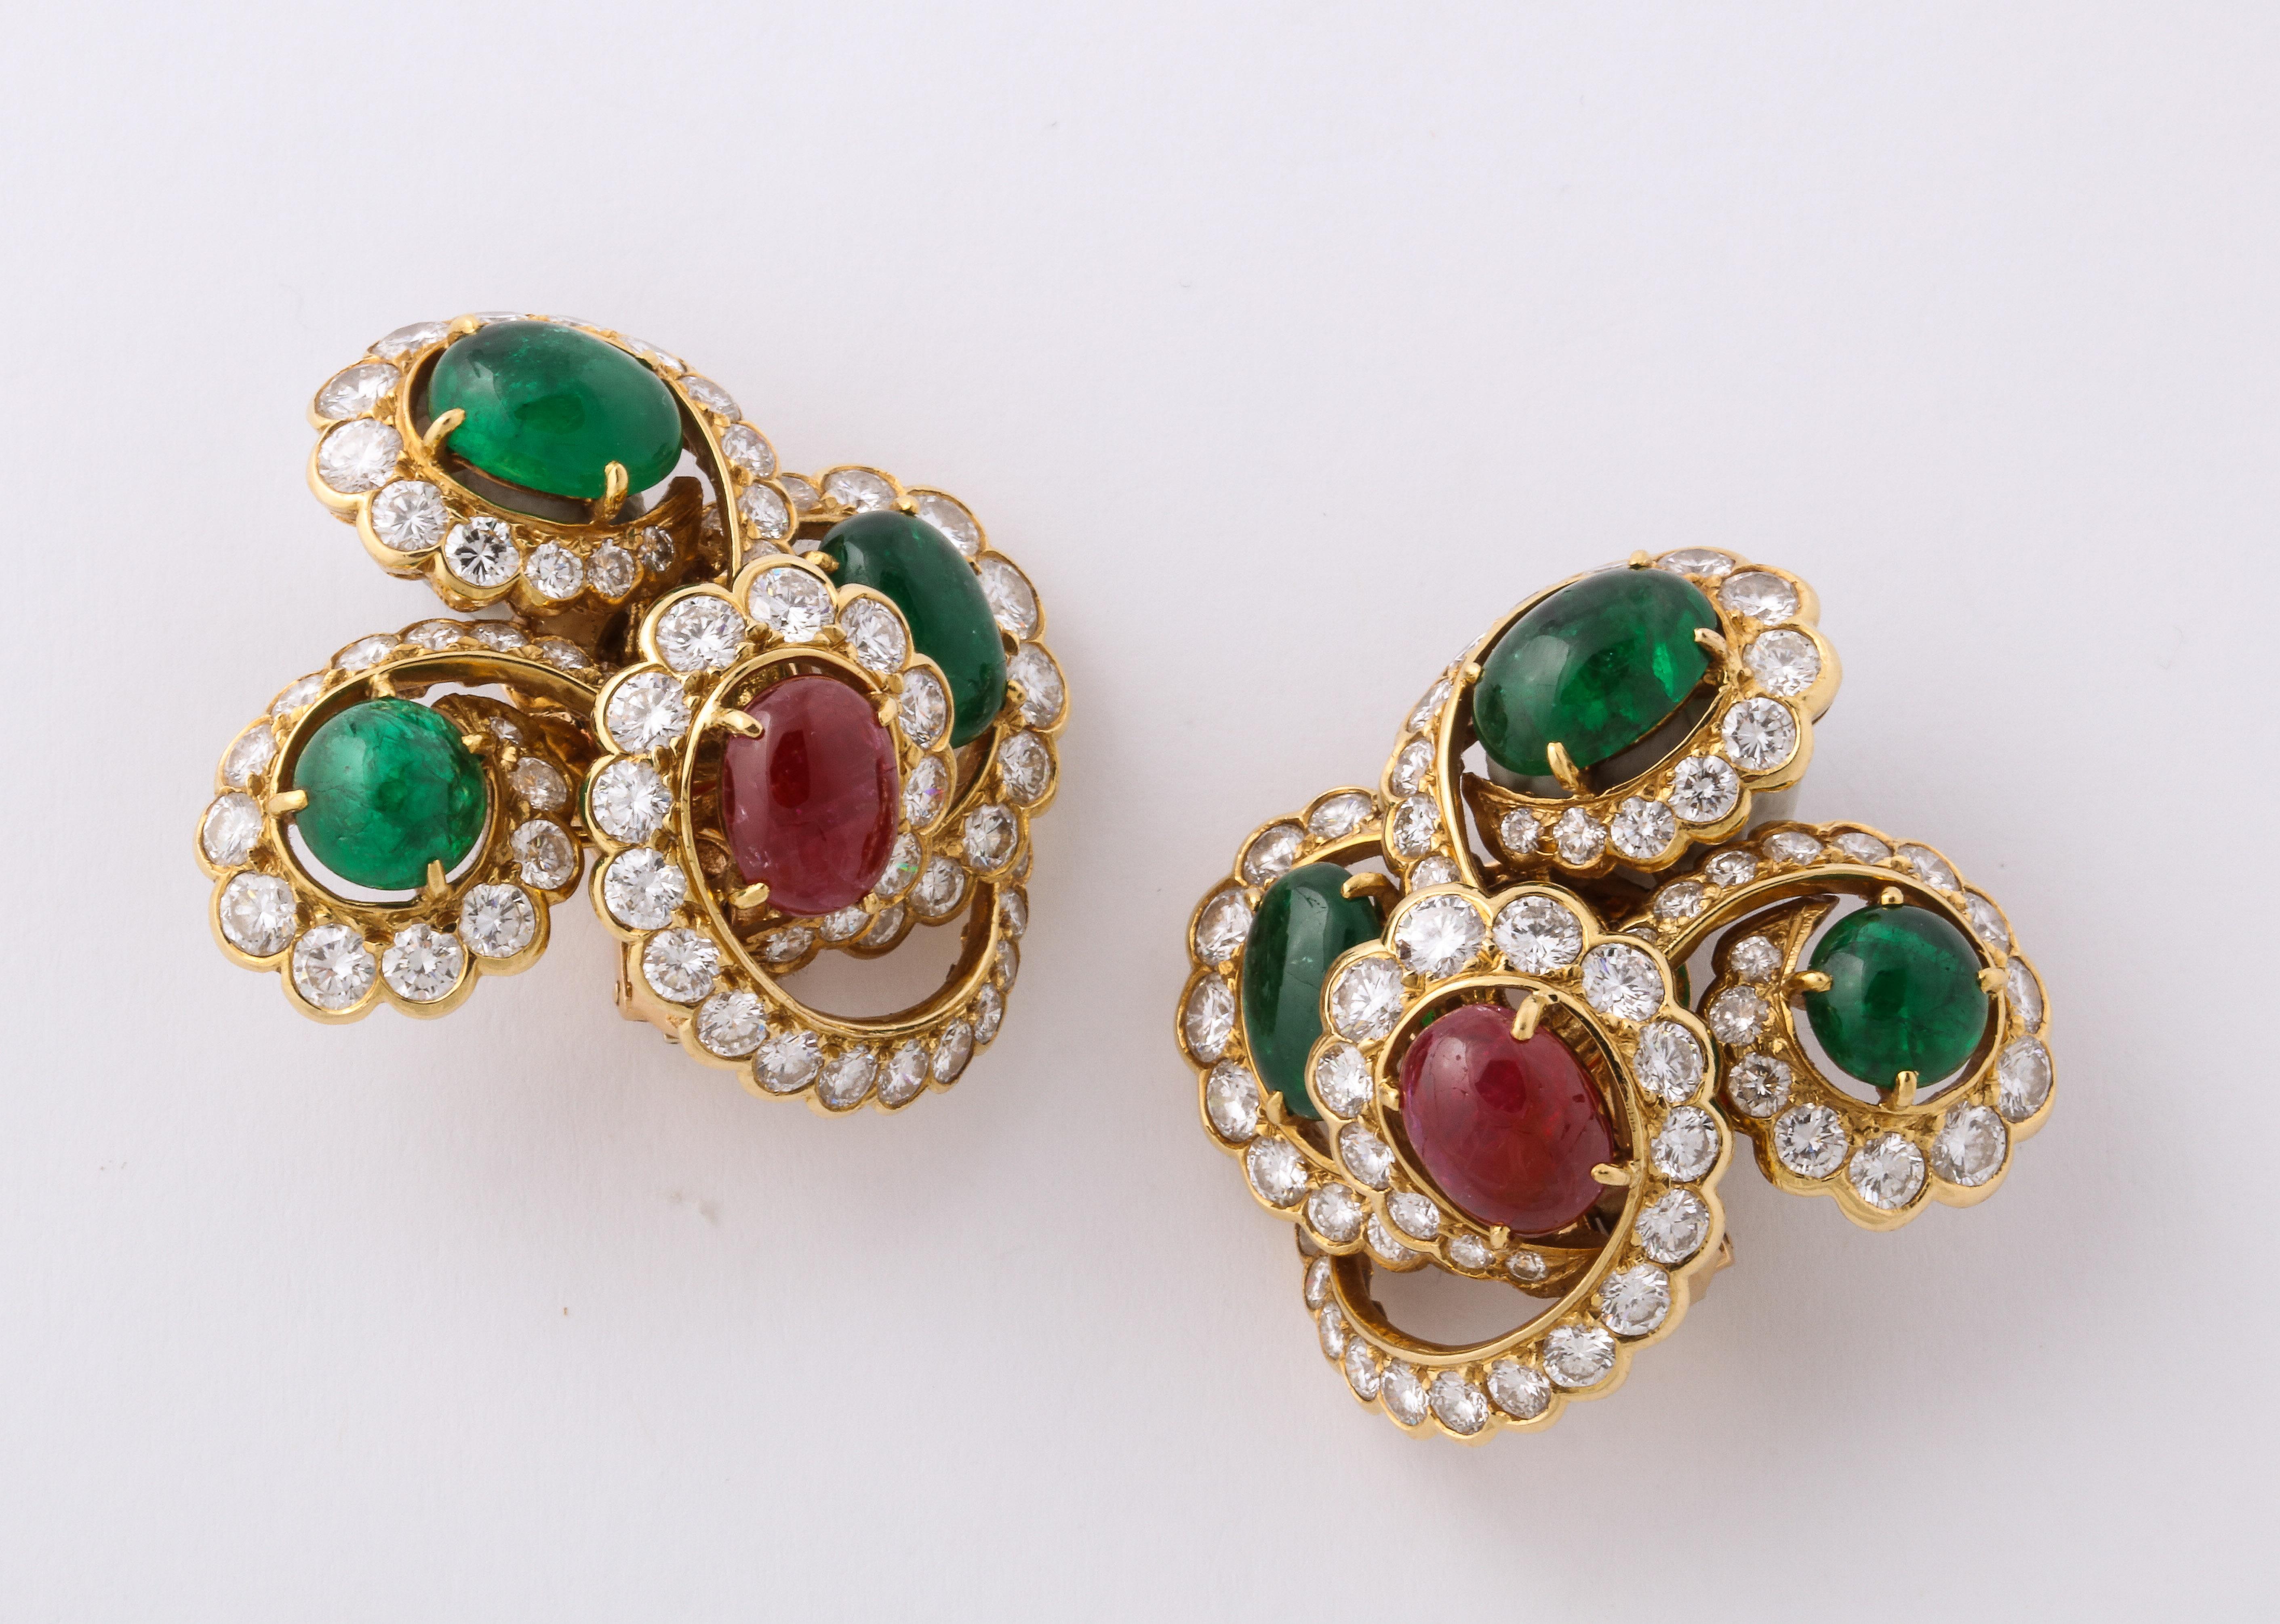 M. Gerard Ruby Emerald Diamond Yellow Gold Clip on Earrings.  18K Yellow Gold 33 grams, 6 emerald cabochons @ 2.40 cts., 2 ruby cabochons @ 1.20 cts. 120 full cut diamonds @ 3.0 cts. Marked M Gerard CST213 OR ,  1  1/2